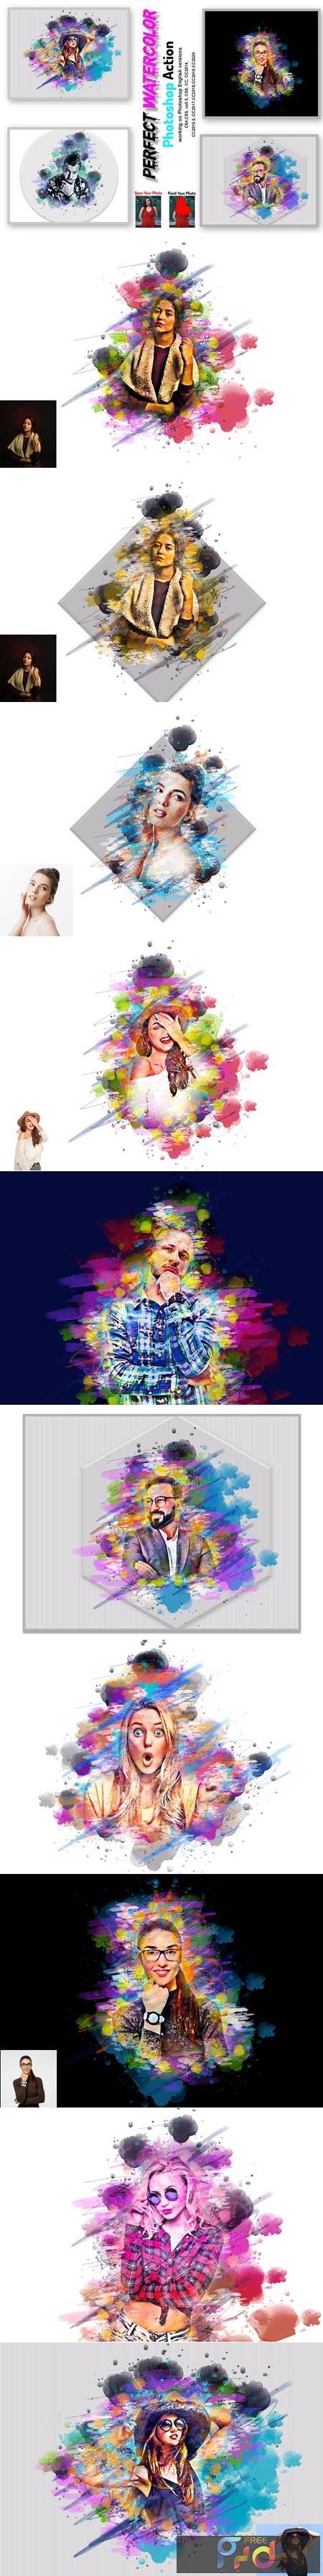 Perfect Watercolor Photoshop Action 5778907 1